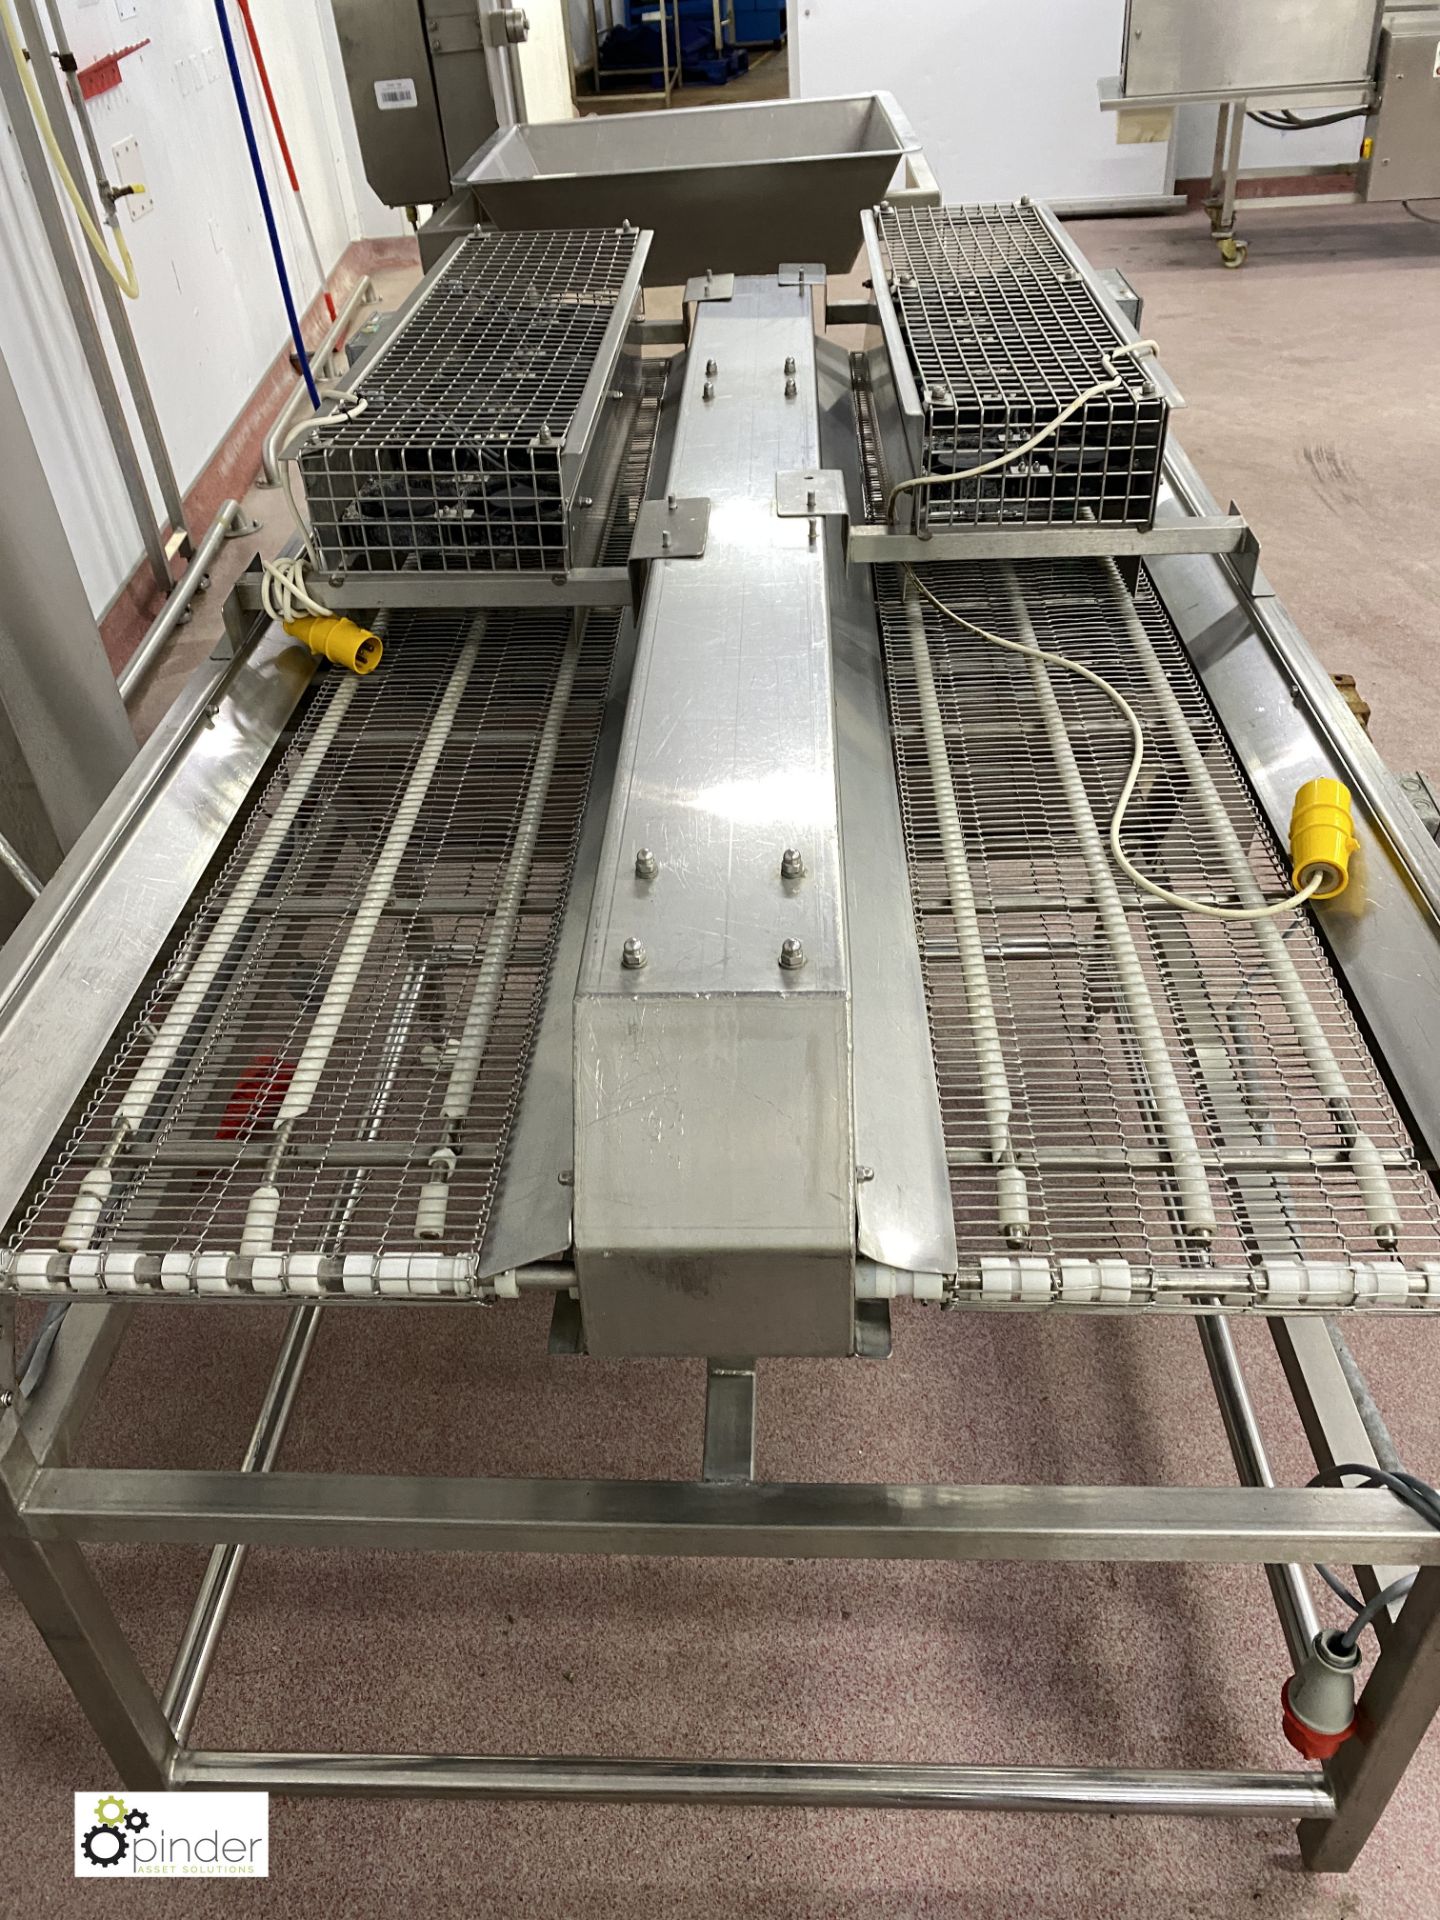 Stainless steel twin lane Cooling Conveyor, 2000mm - Image 4 of 6